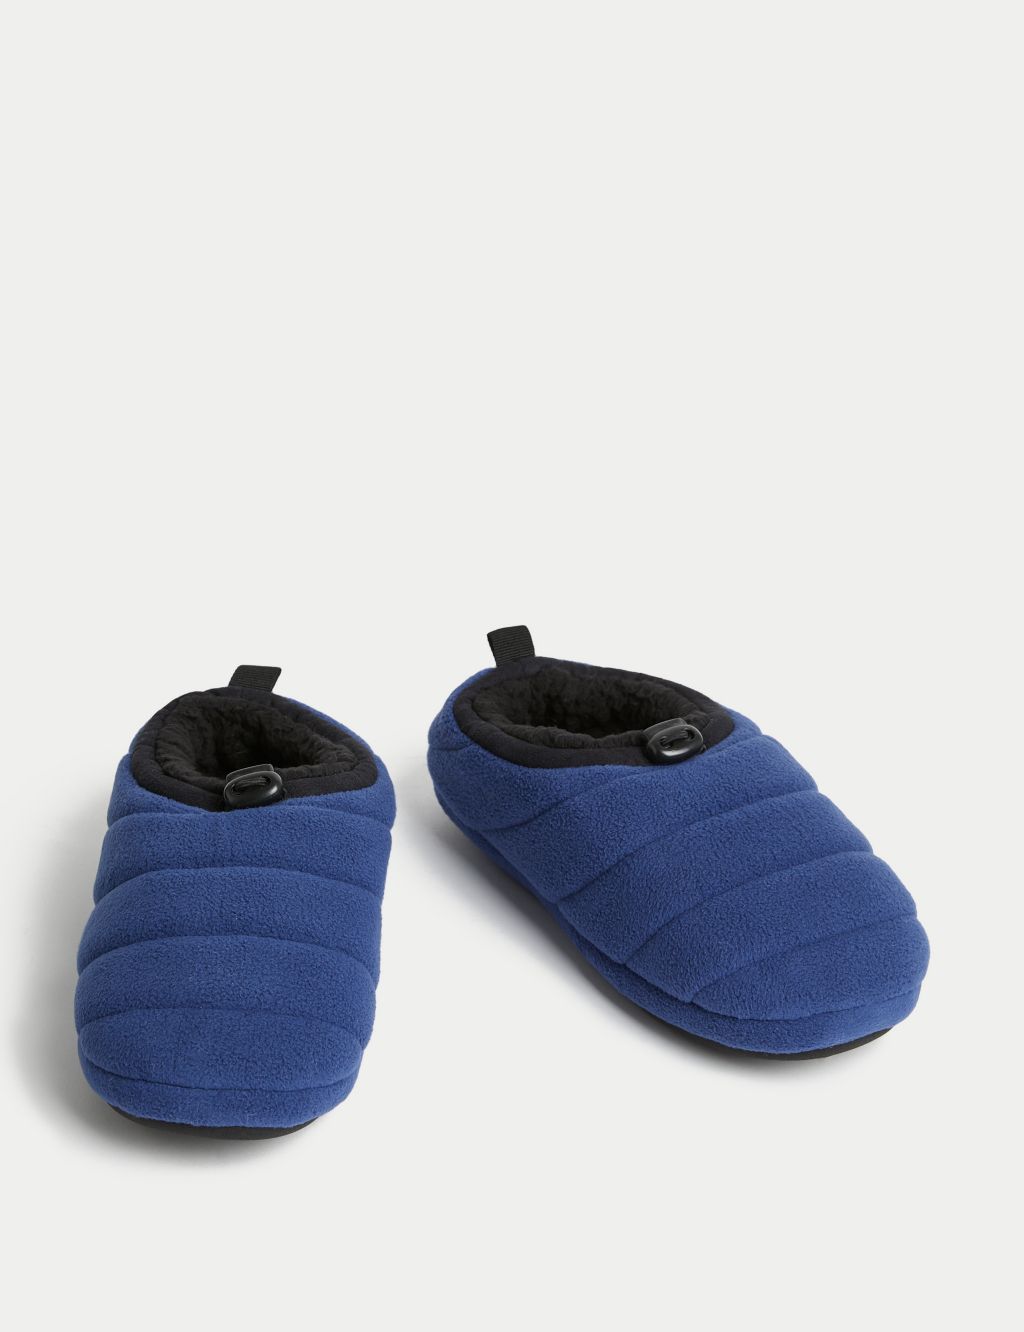 Kids' Quilted Slippers (13 Small - 7 large) image 2